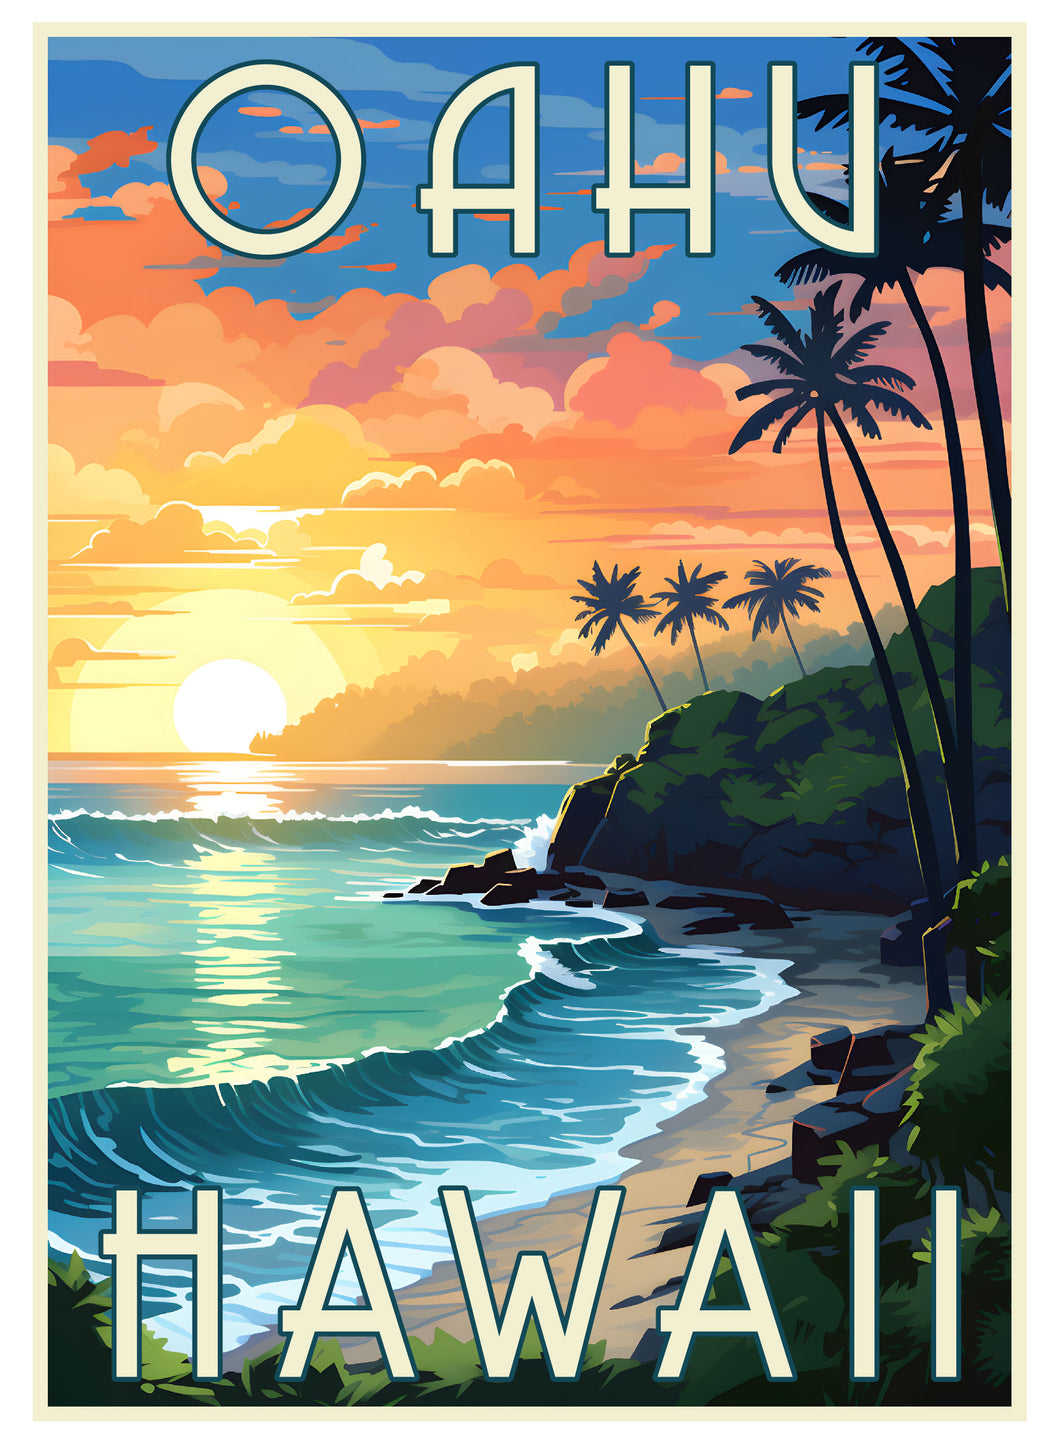 Exclusive Oahu Hawaii Collectible - Vintage Travel Poster Art